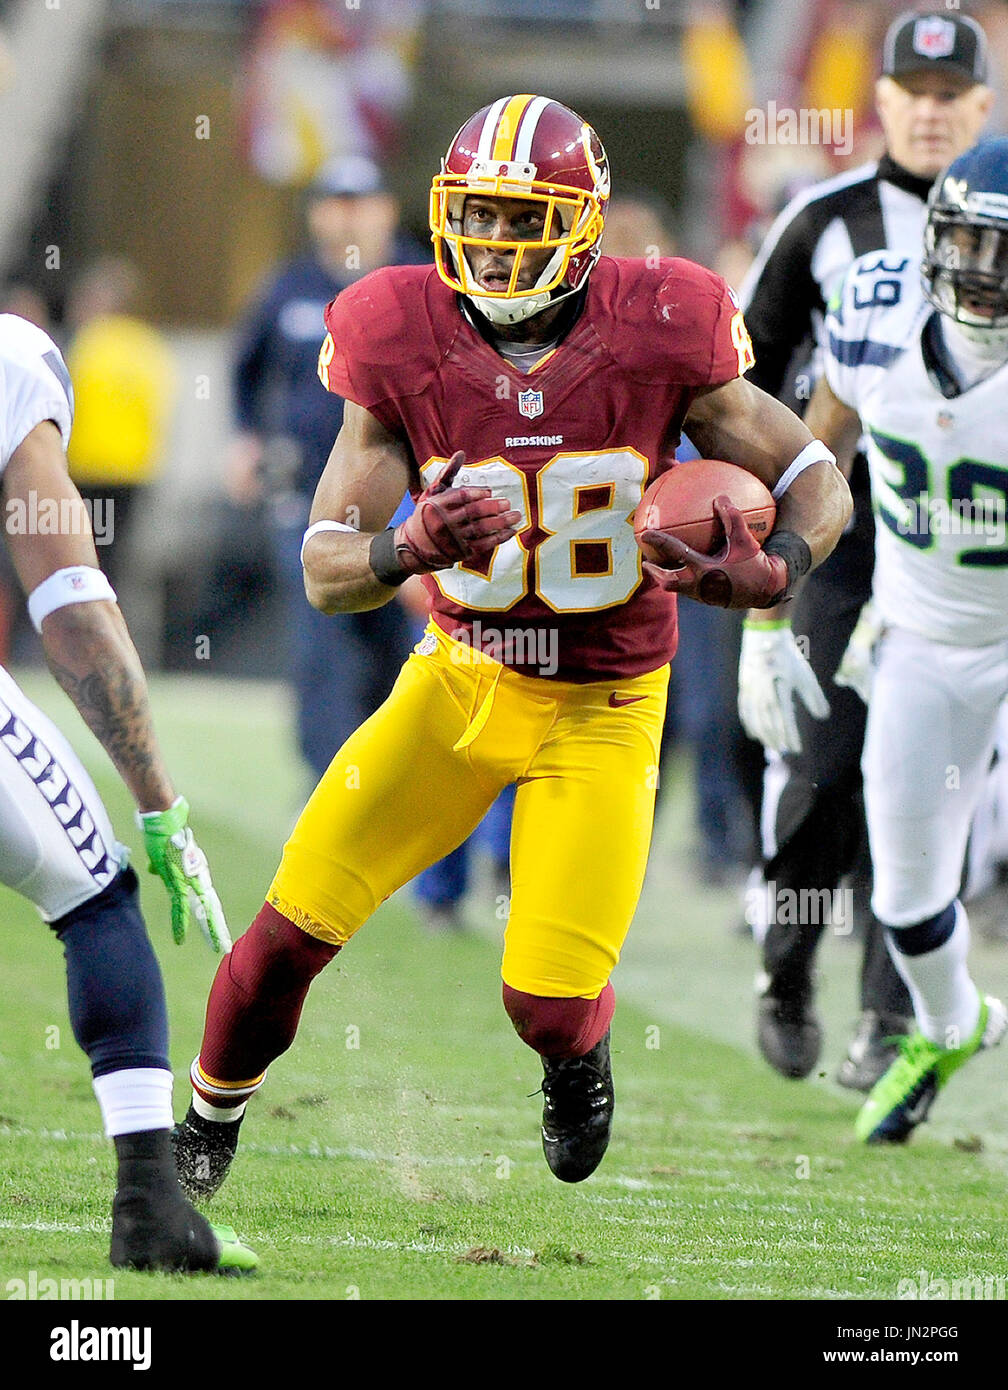 Washington Redskins wide receiver Pierre Garcon (88) looks for extra yardage after making a catch during the Redskins' first drive of the first quarter against the Seattle Seahawks during an NFC Wild-card play-off game at FedEx Field in Landover, Maryland on Sunday, January 6, 2013.  The Seahawks won the game 24 - 14..Credit: Ron Sachs / CNP Stock Photo